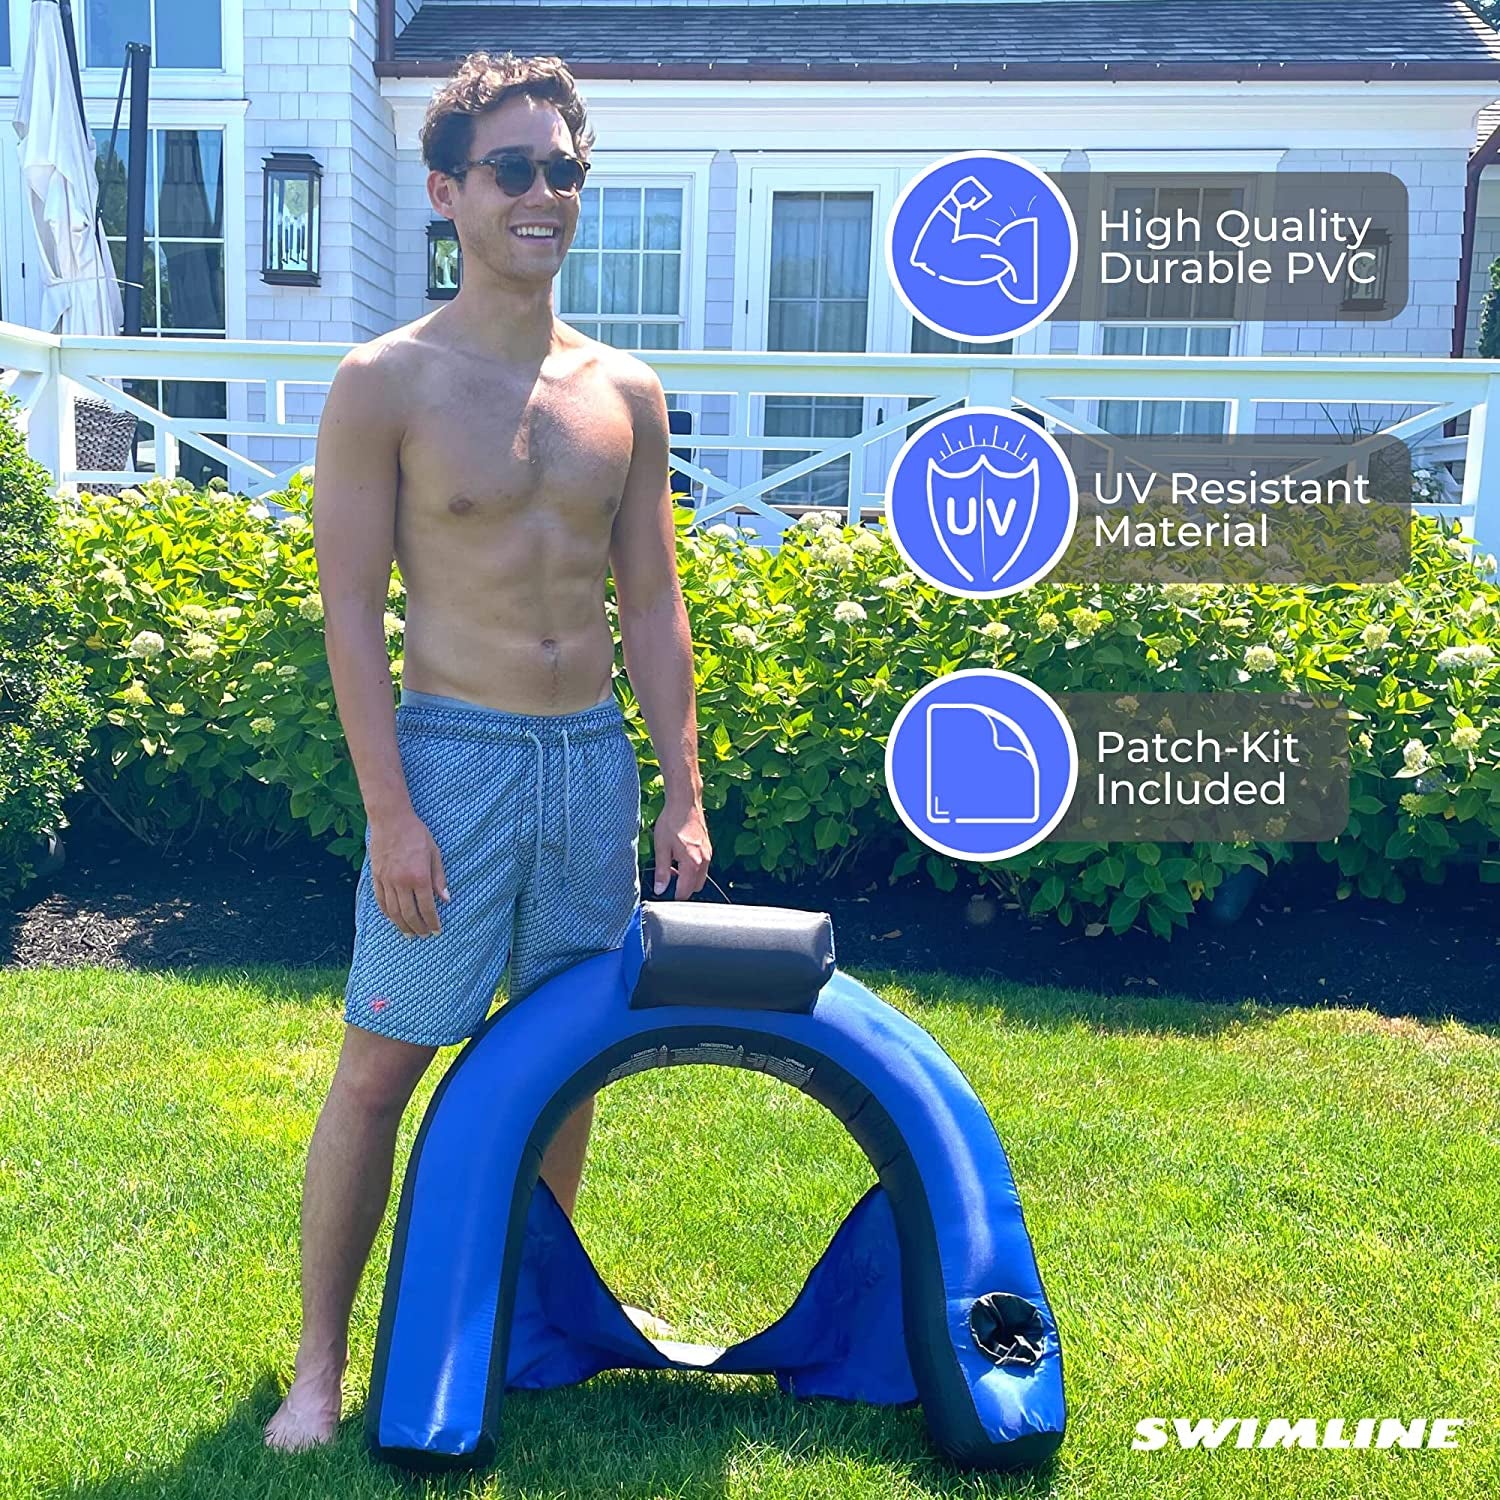 SWIMLINE ORIGINAL Fabric Covered U-Seat Inflatable Pool Lounger | with Comfortable Sling Seat, Back Rest, and Built in Cup Holder | for Pool, Beach, Lake, and More